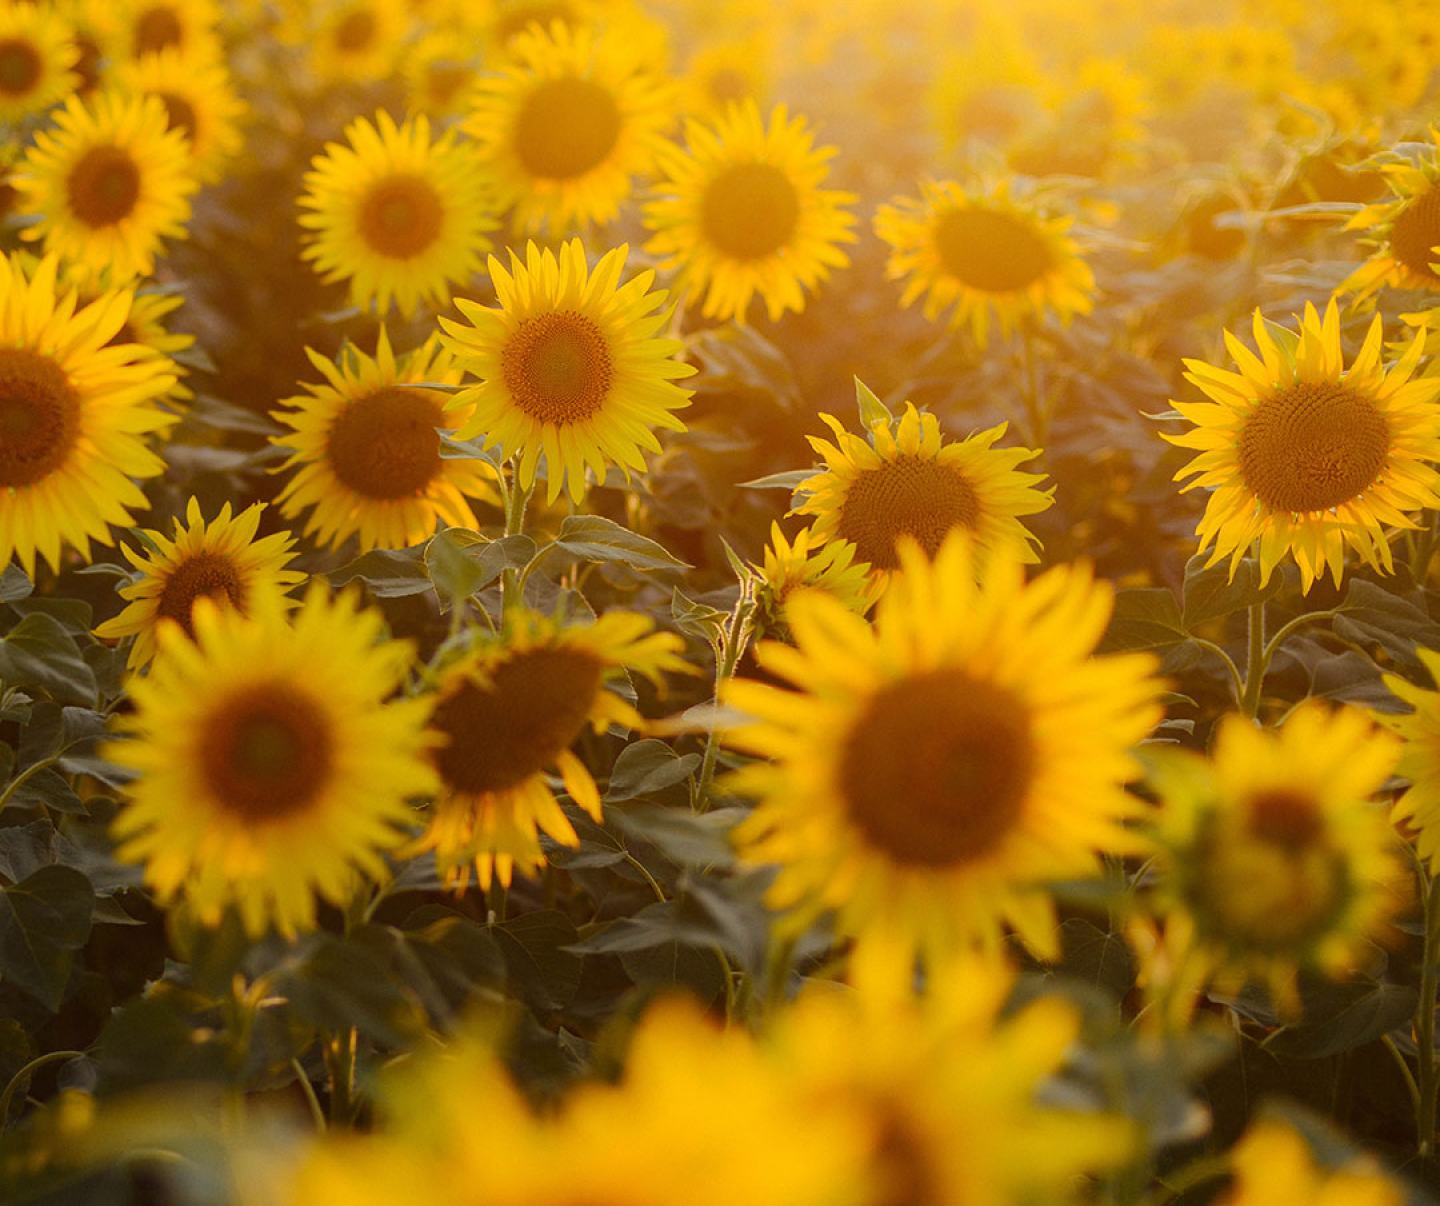 Group of sunflowers in field